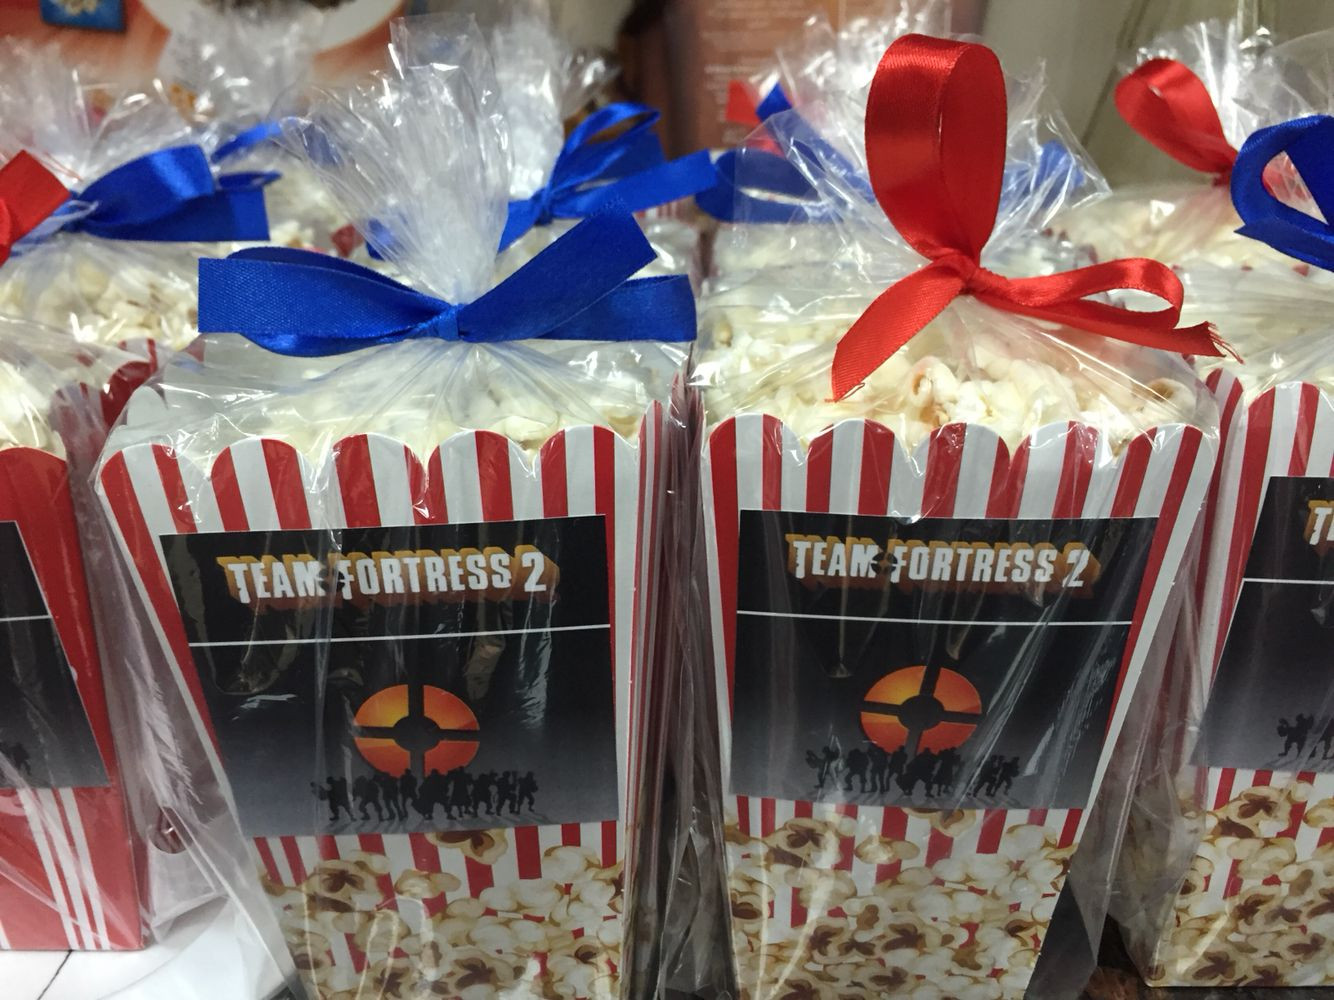 Team Fortress 2 Birthday Party Ideas
 Team fortress 2 popcorn